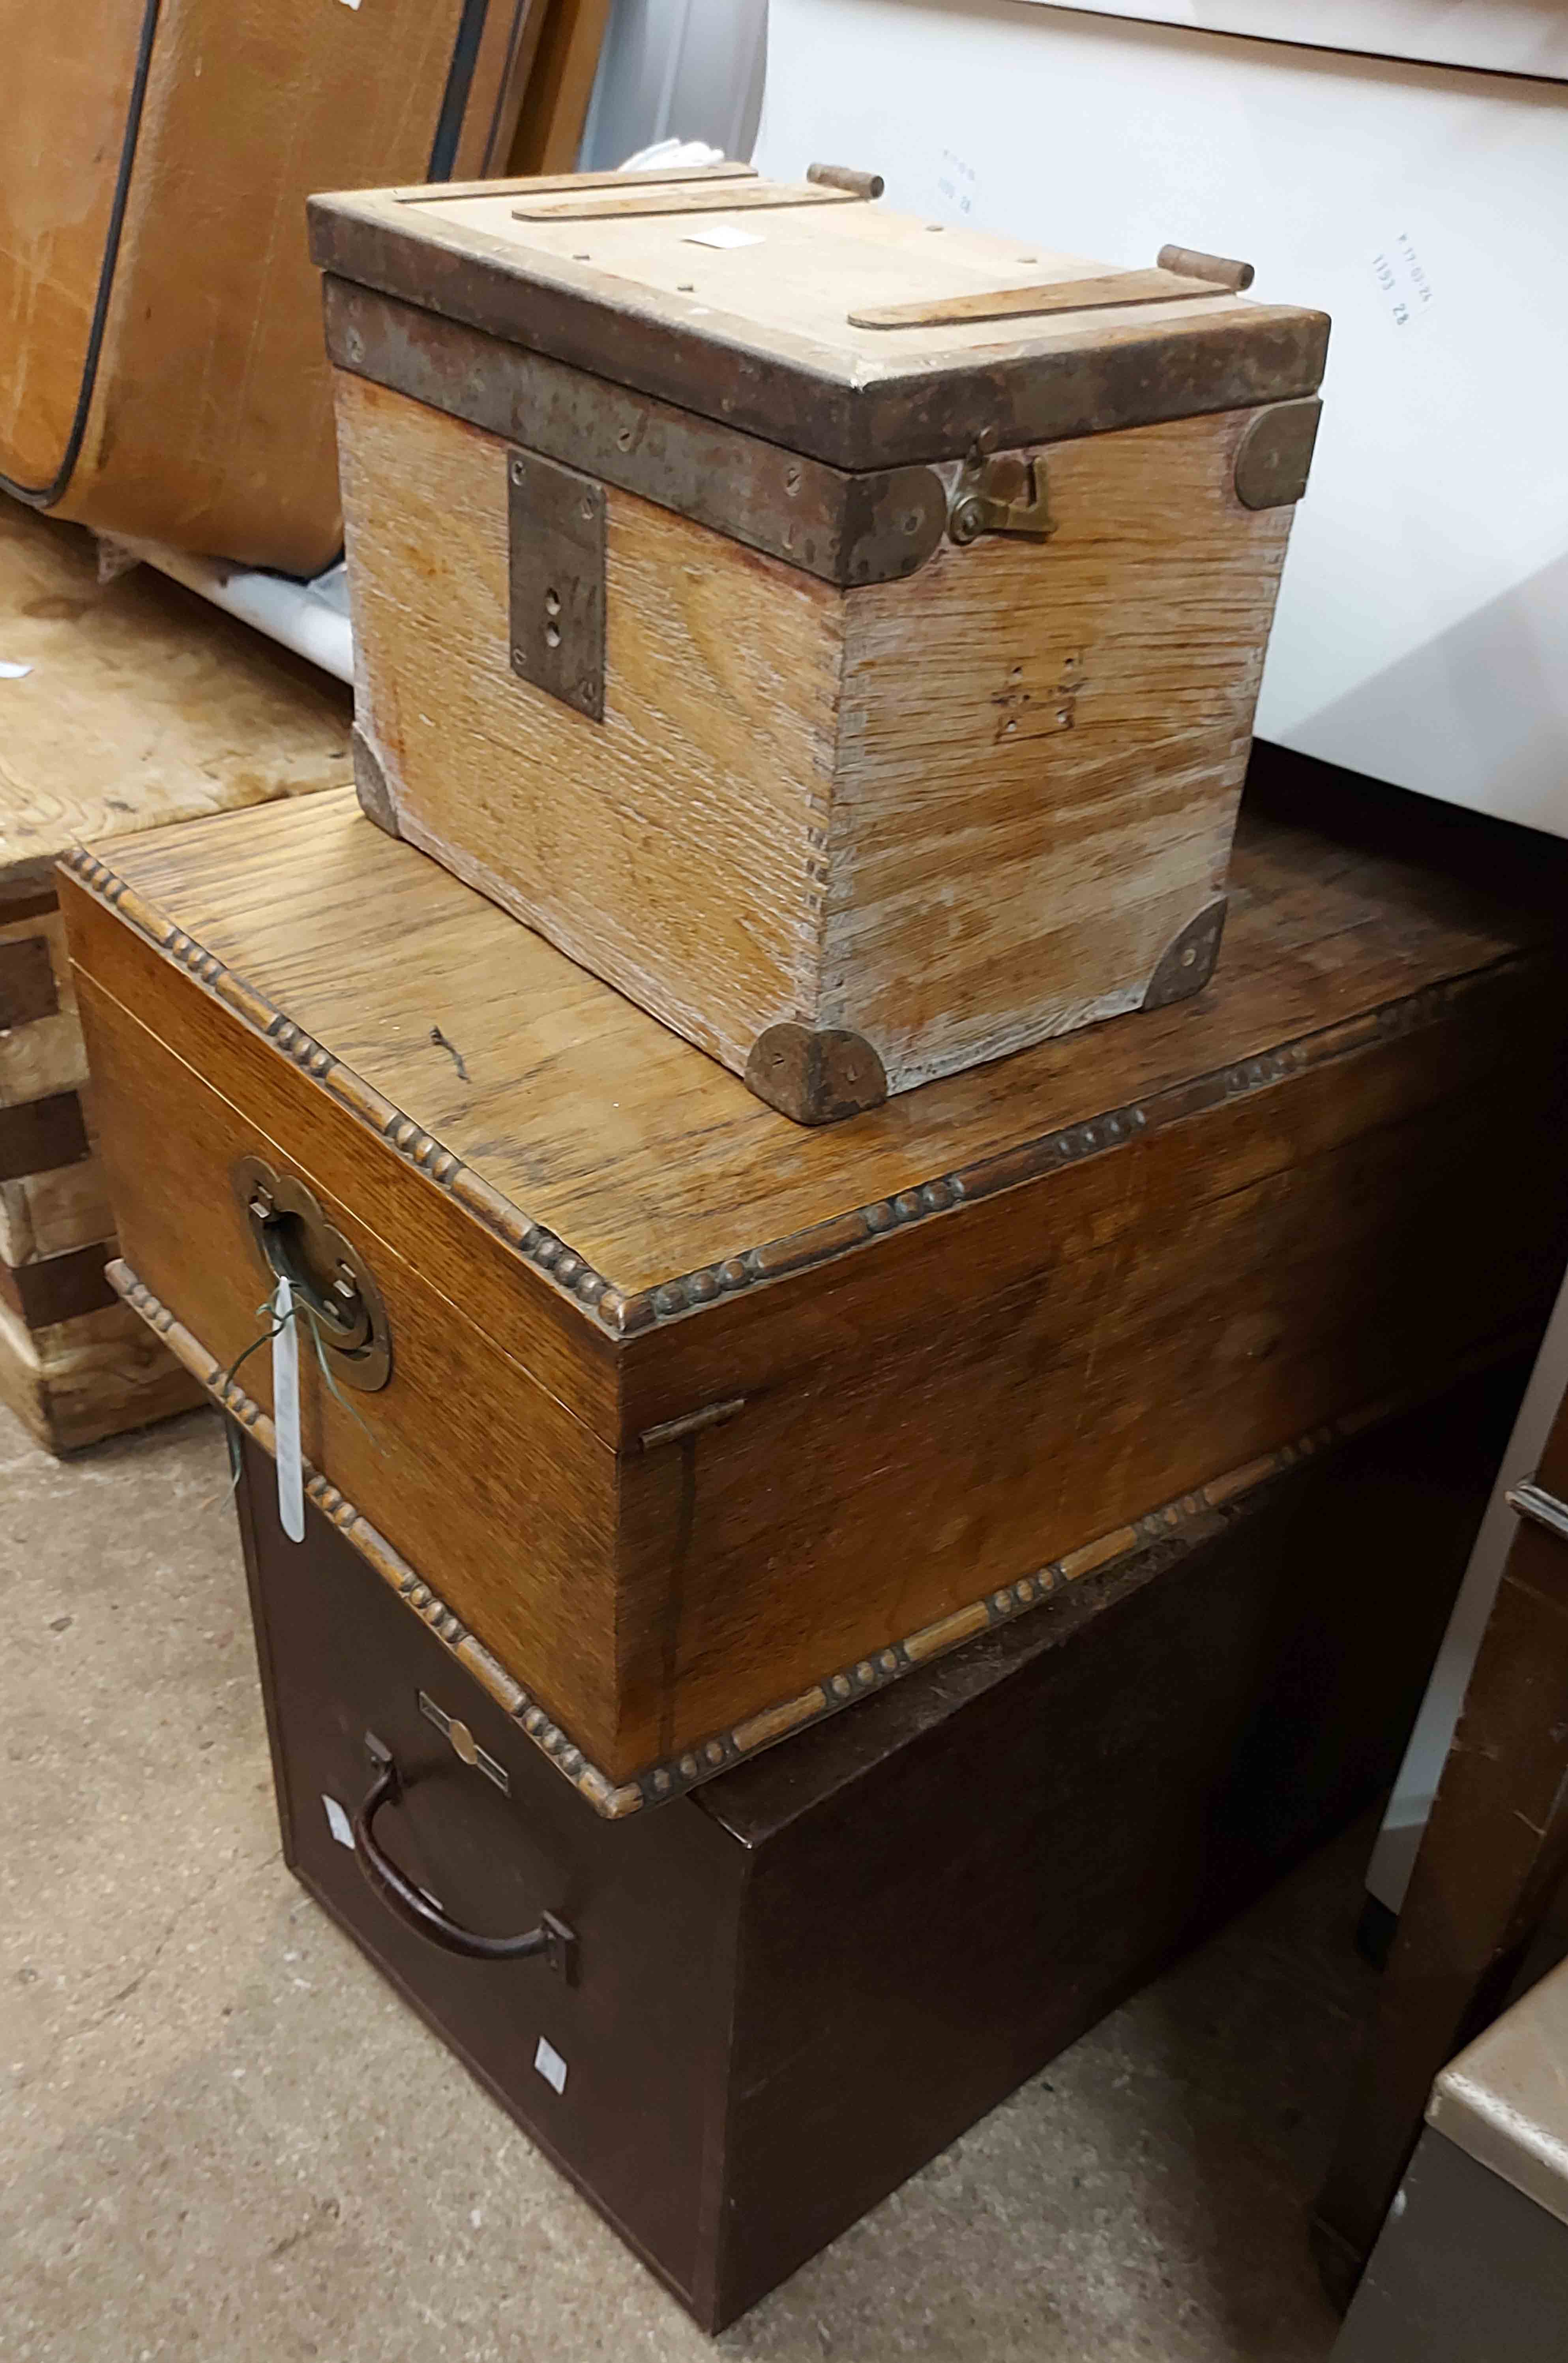 A metal trunk - locked shut - sold with a small wooden box and a cutlery box